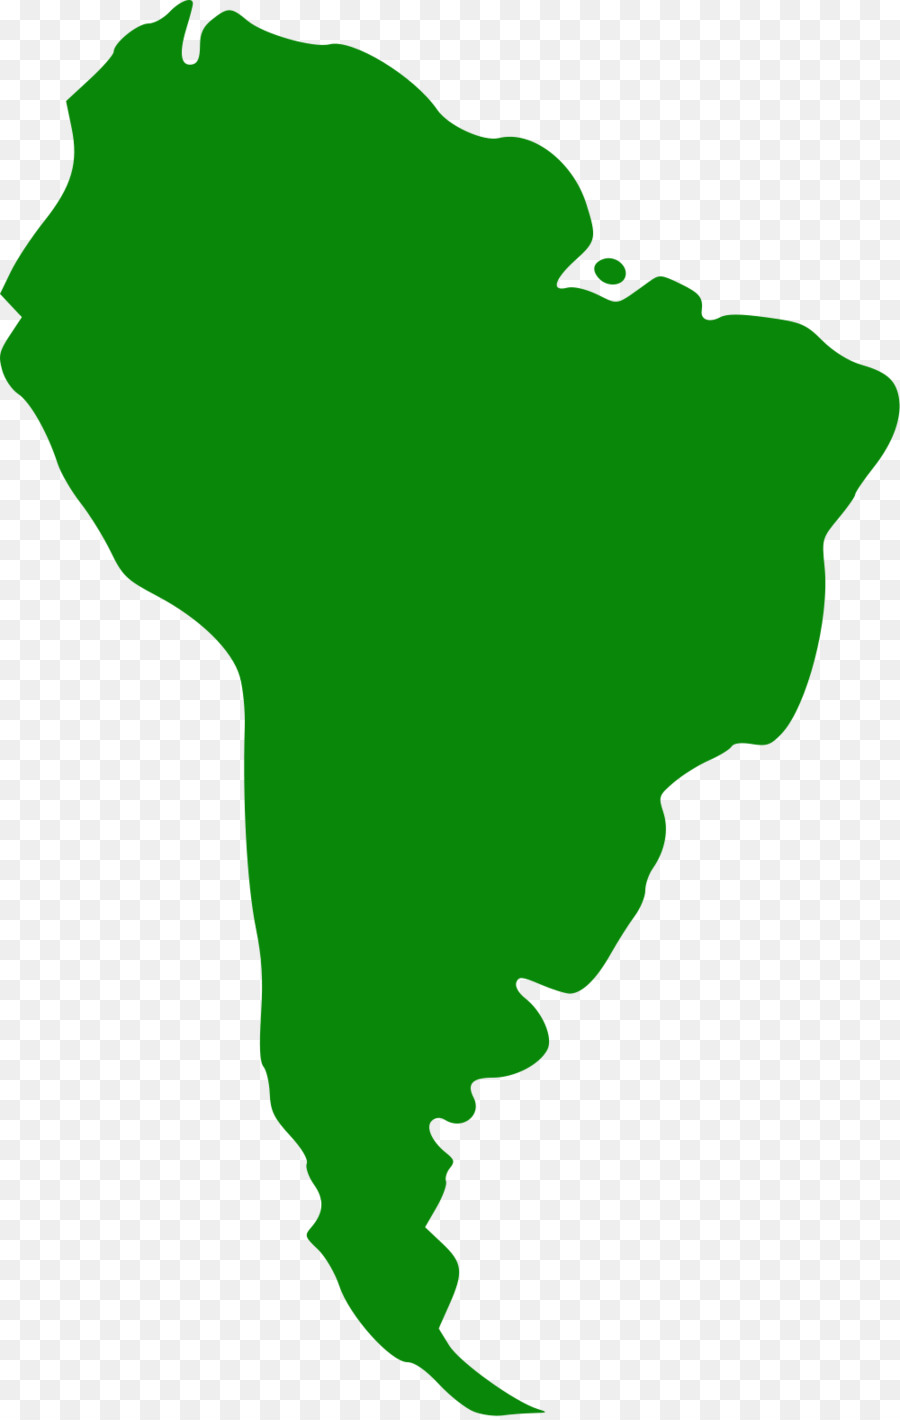 South America United States Continent Map Geography - united states png download - 1000*1575 - Free Transparent South America png Download.